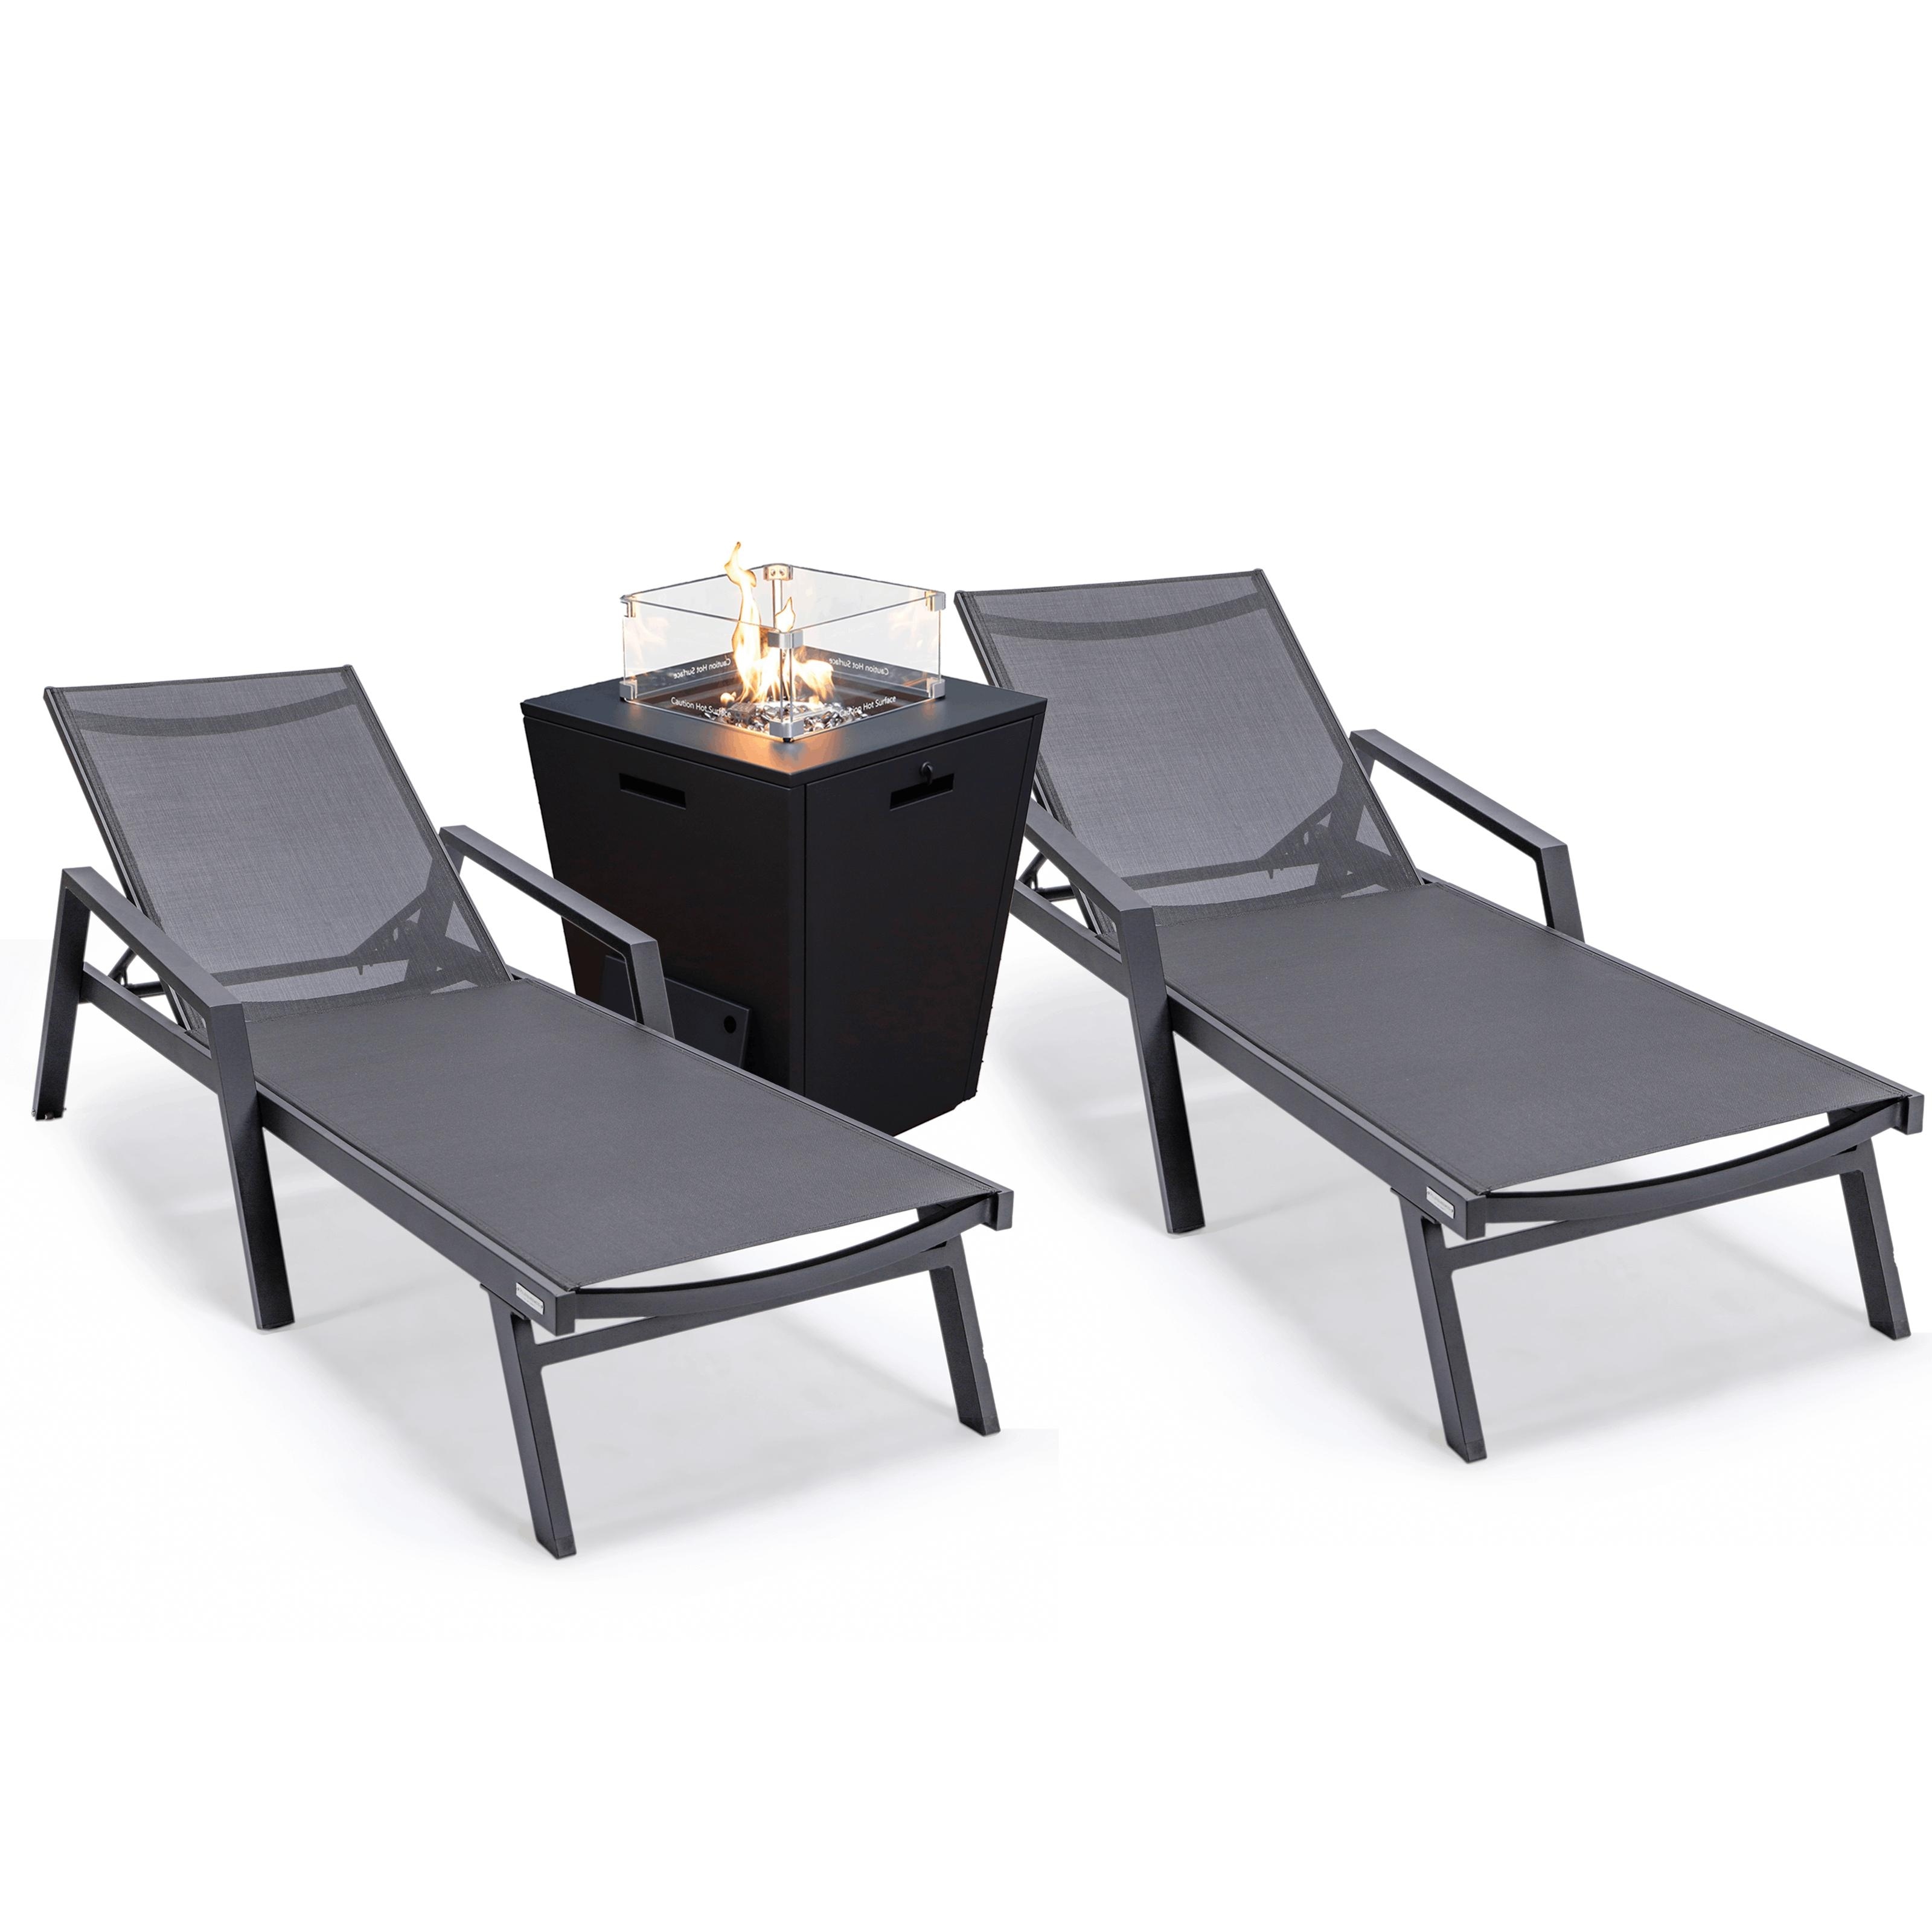 Leisuremod Marlin Chaise Lounge Chair With Arms Set Of 2 With Fire Pit Table